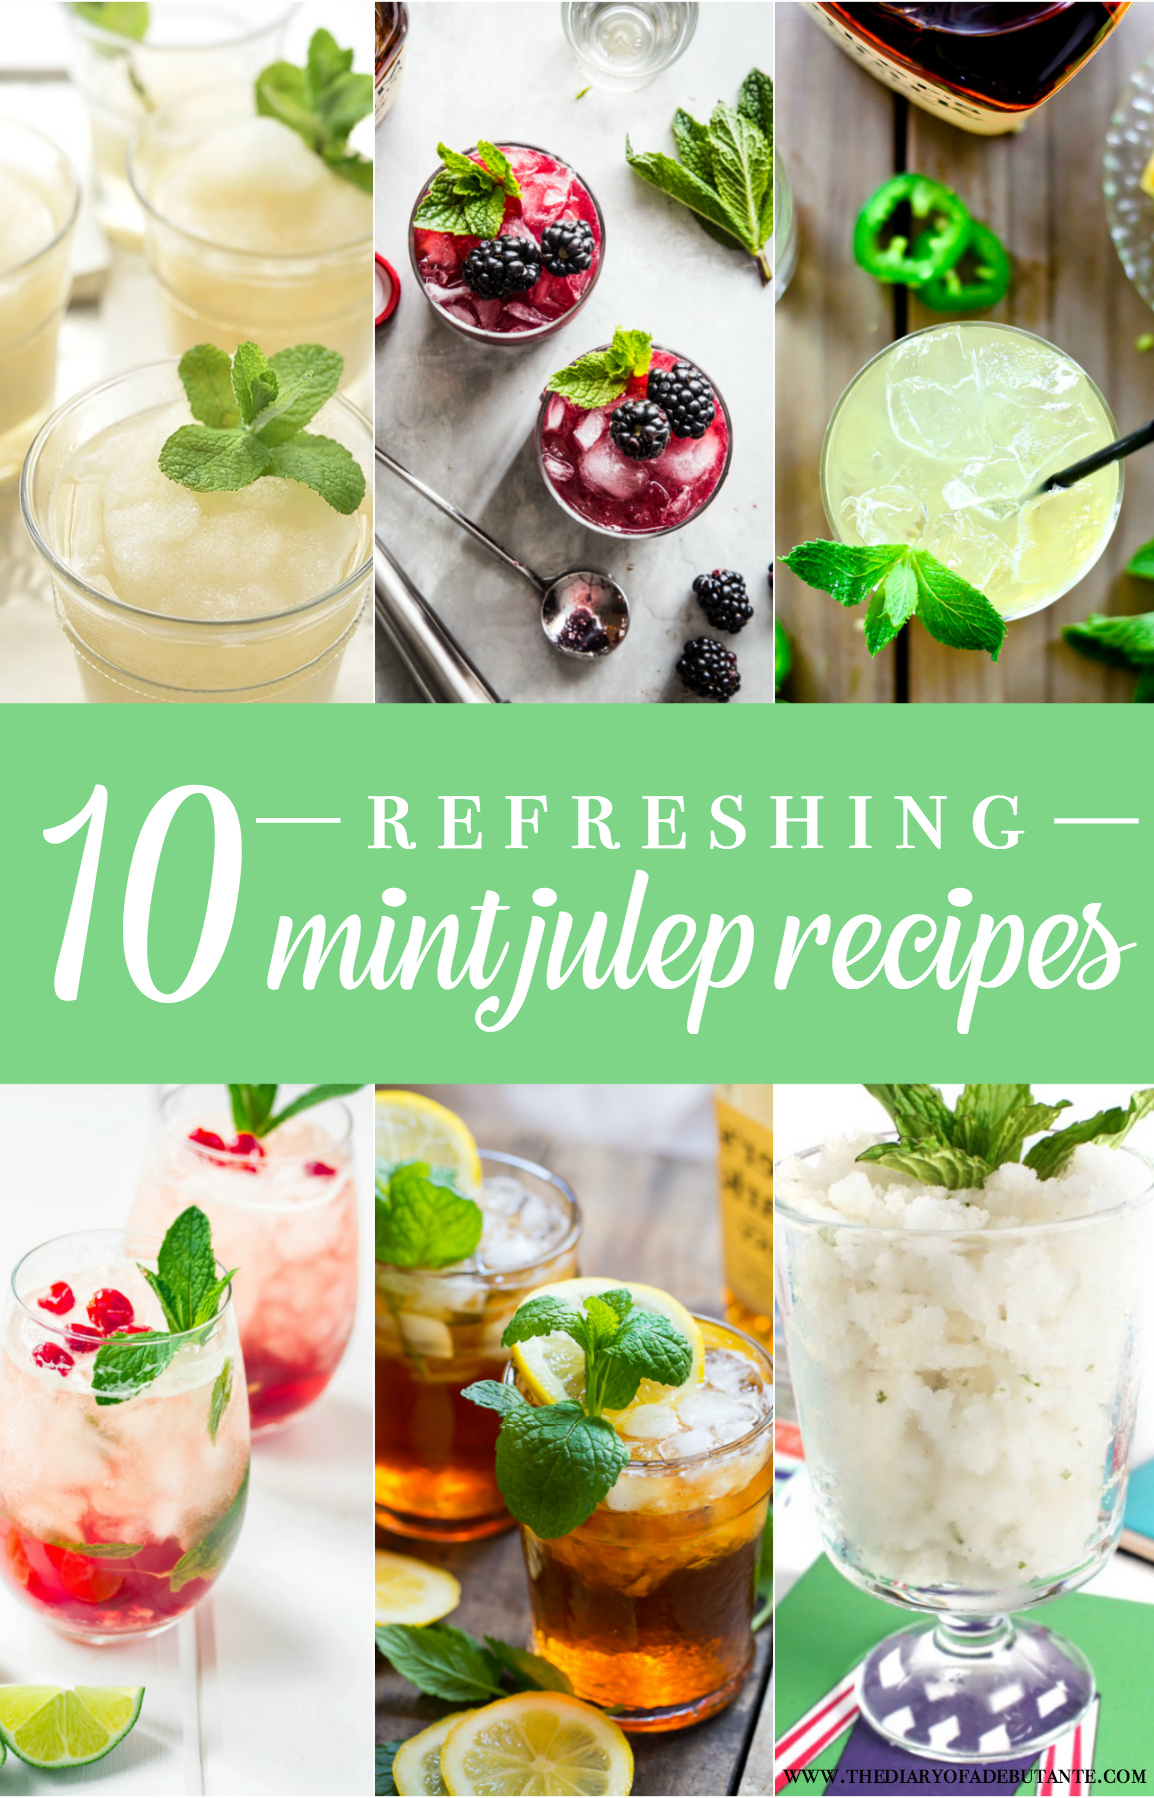 Refreshing Mint Julep Recipes, Mint Julep Recipes, Derby Day Cocktails, Derby Day, Stephanie Ziajka, Diary of a Debutante